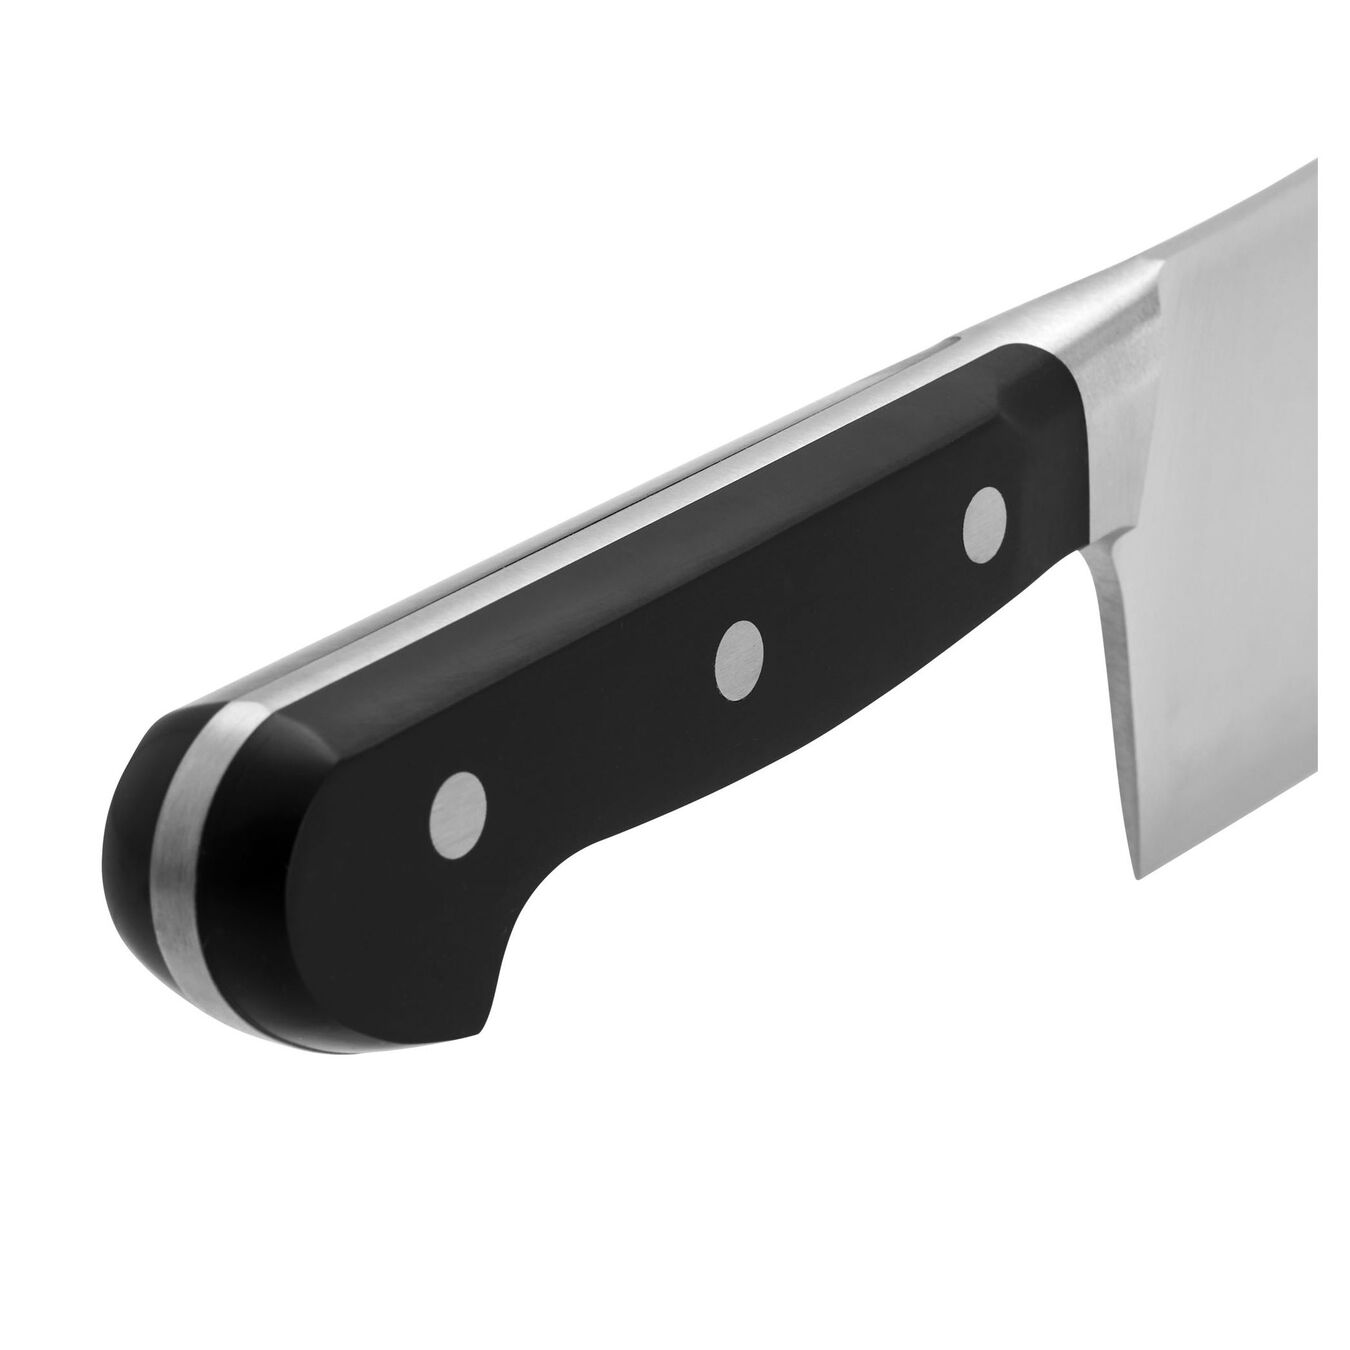 6.5 inch Cleaver - Visual Imperfections,,large 3